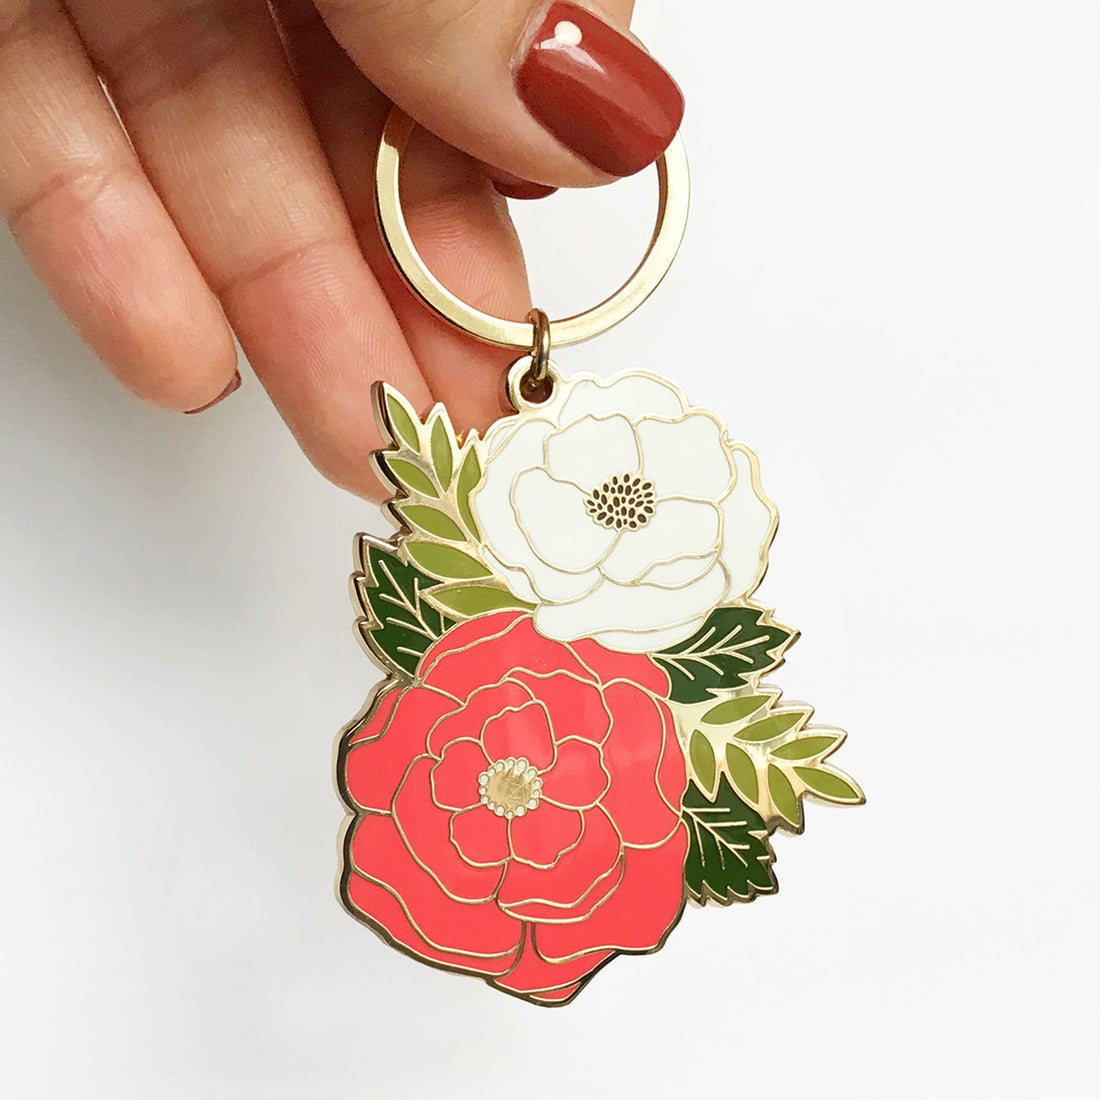 Unique gifts for plant lovers. Floral cluster keychain.